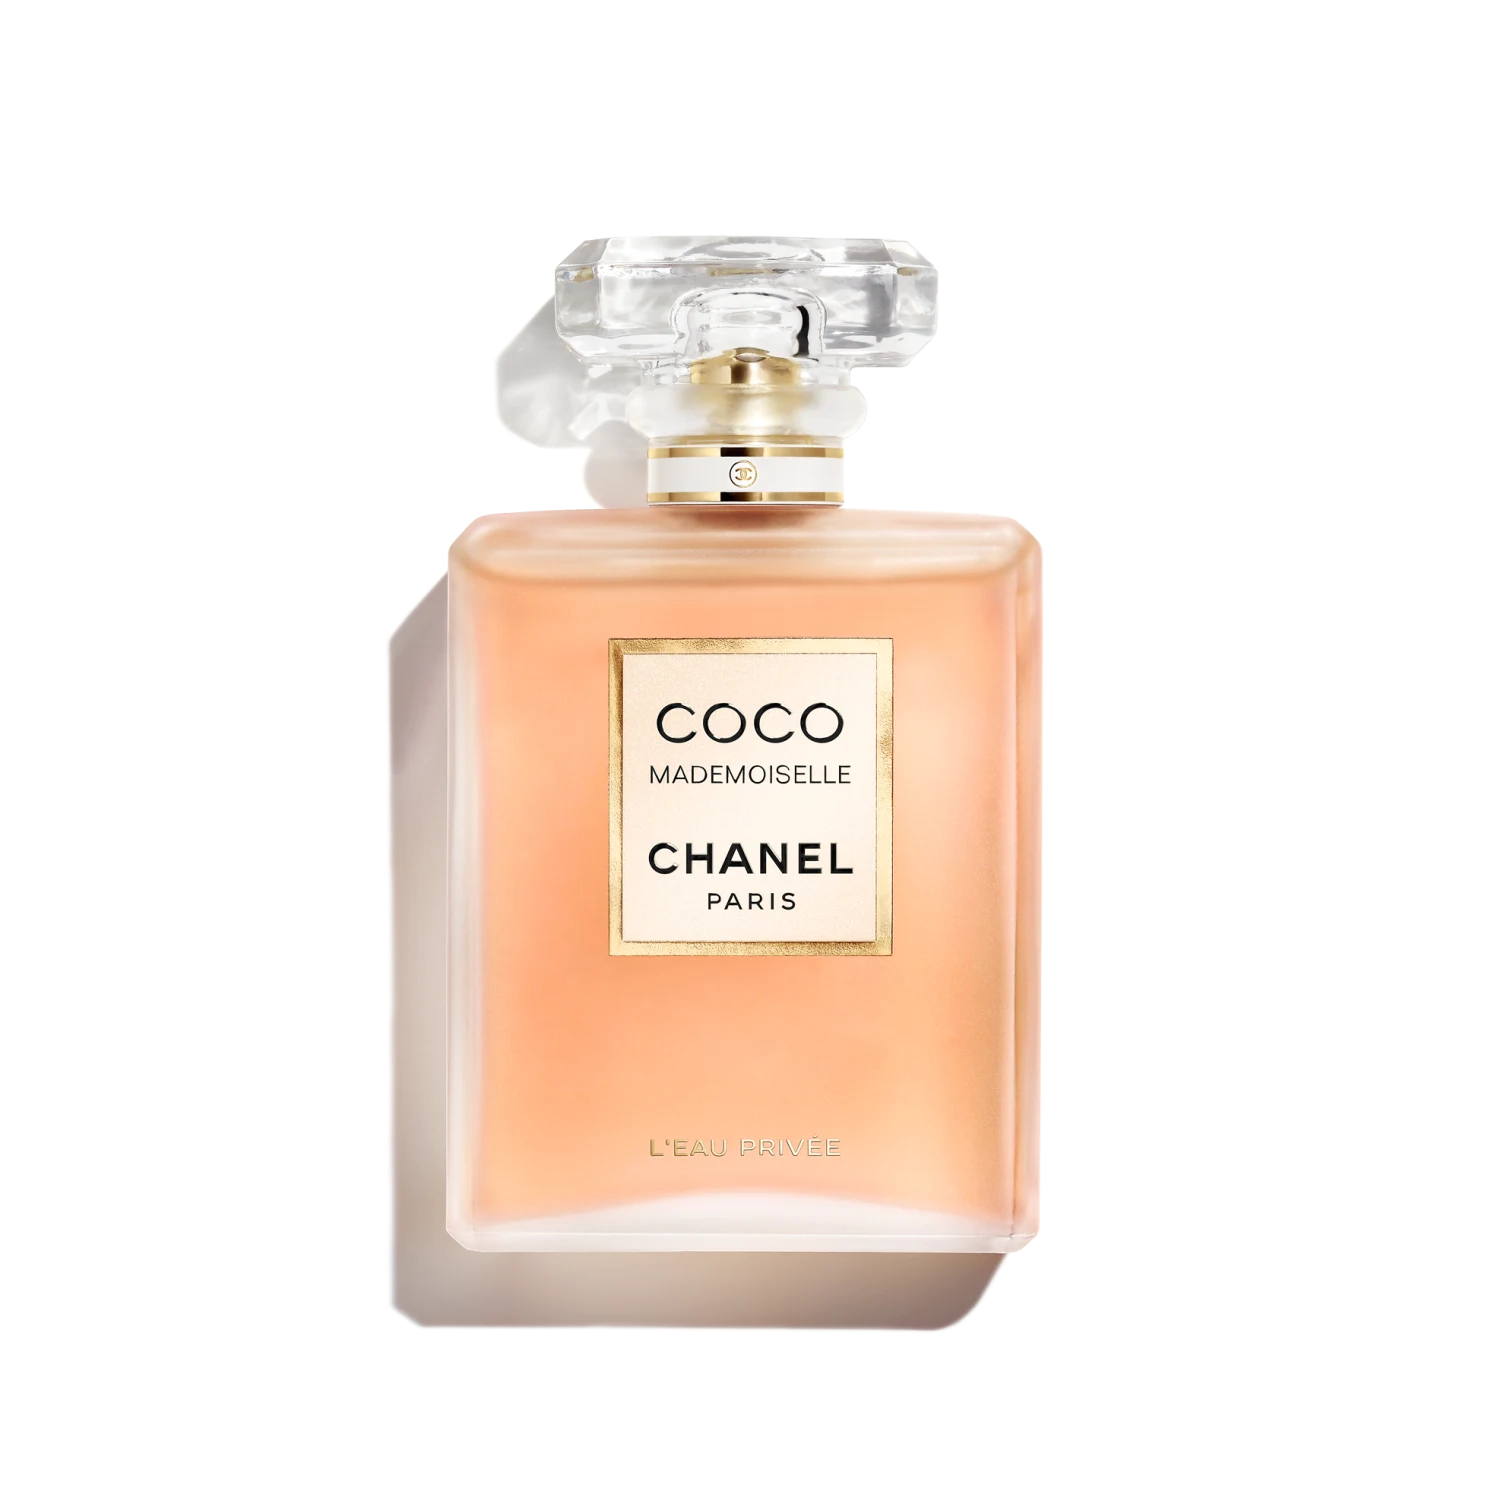 Вода парфюмерная Chanel Coco Mademoiselle L'Eau Privee женская, 100 мл l irreguliere ou mon itineraire coco chanel